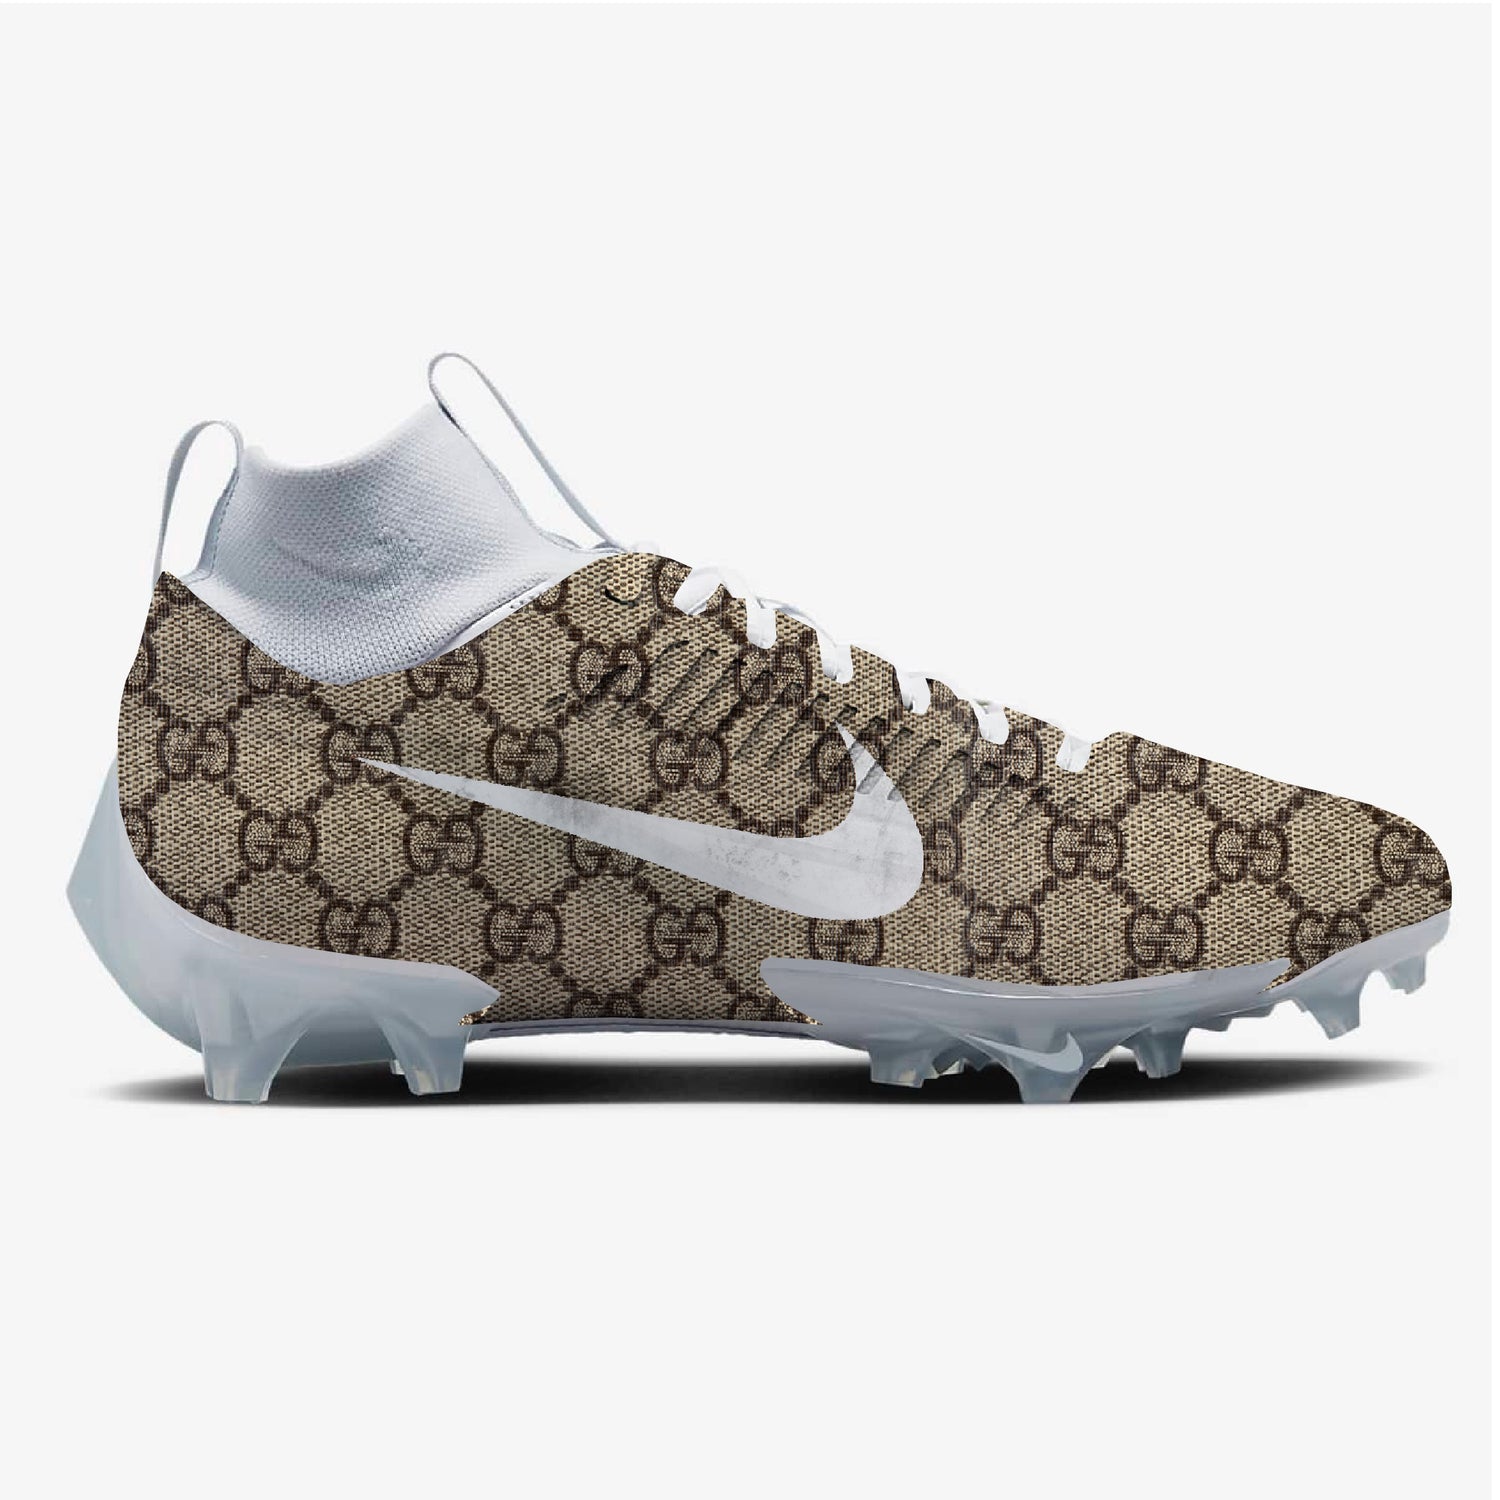 Gucci Material Nike Football Cleats